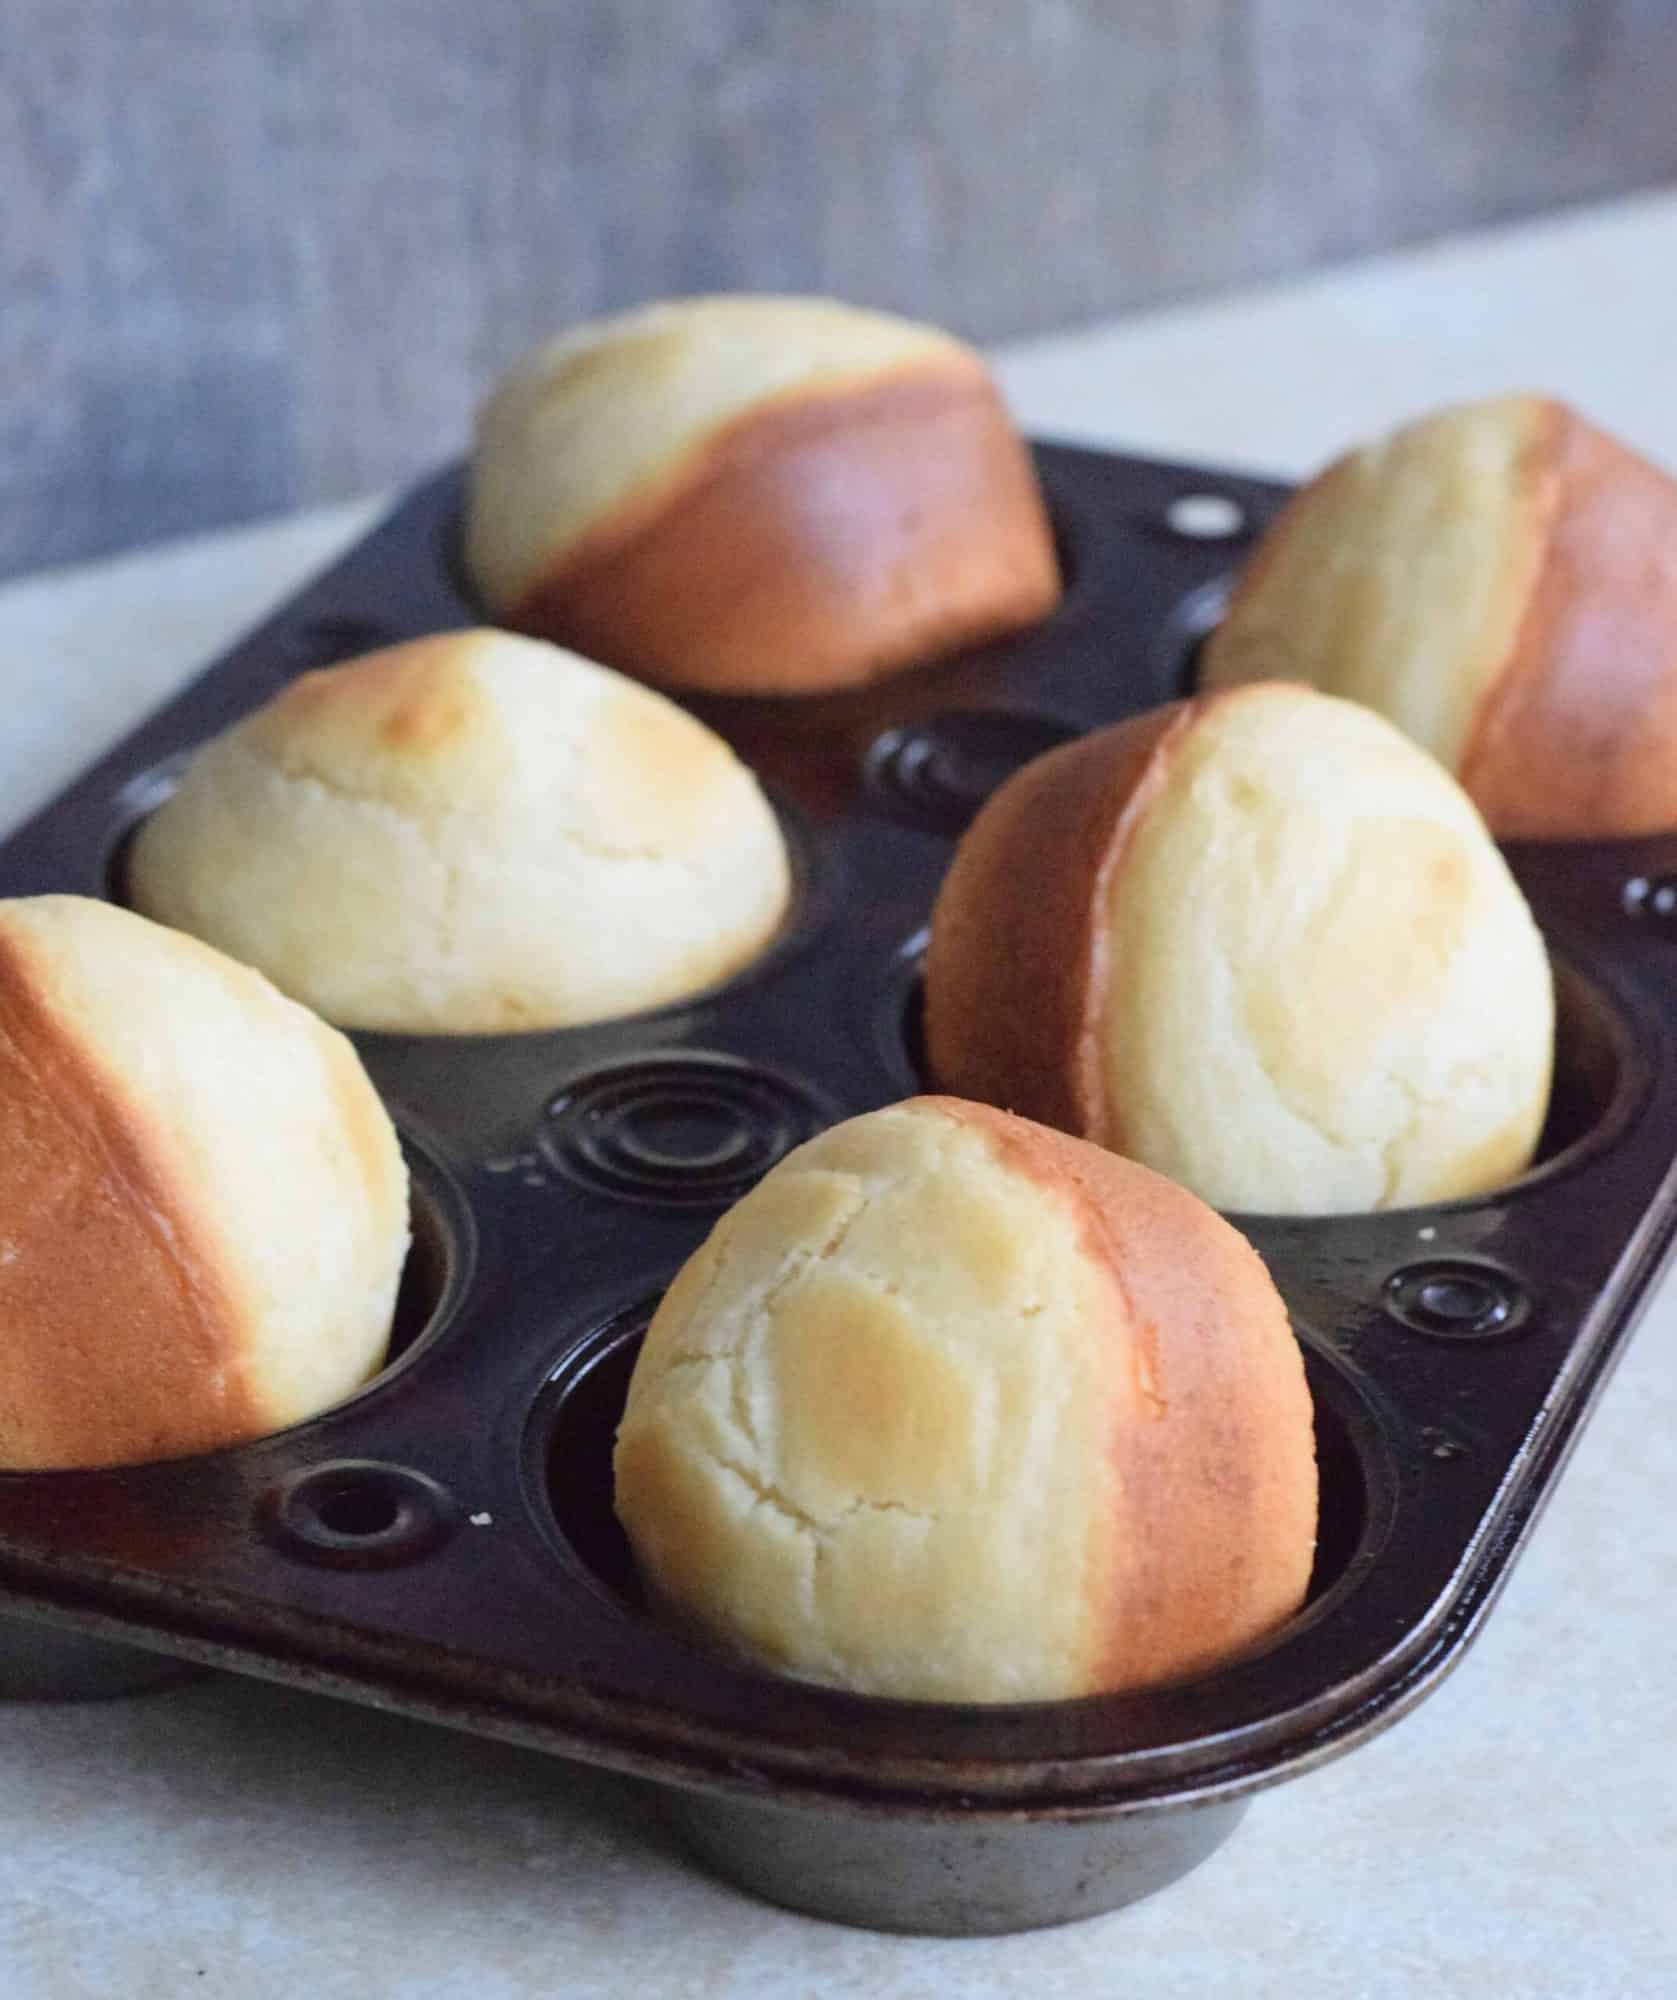 six round rolls baked in a muffin tin.